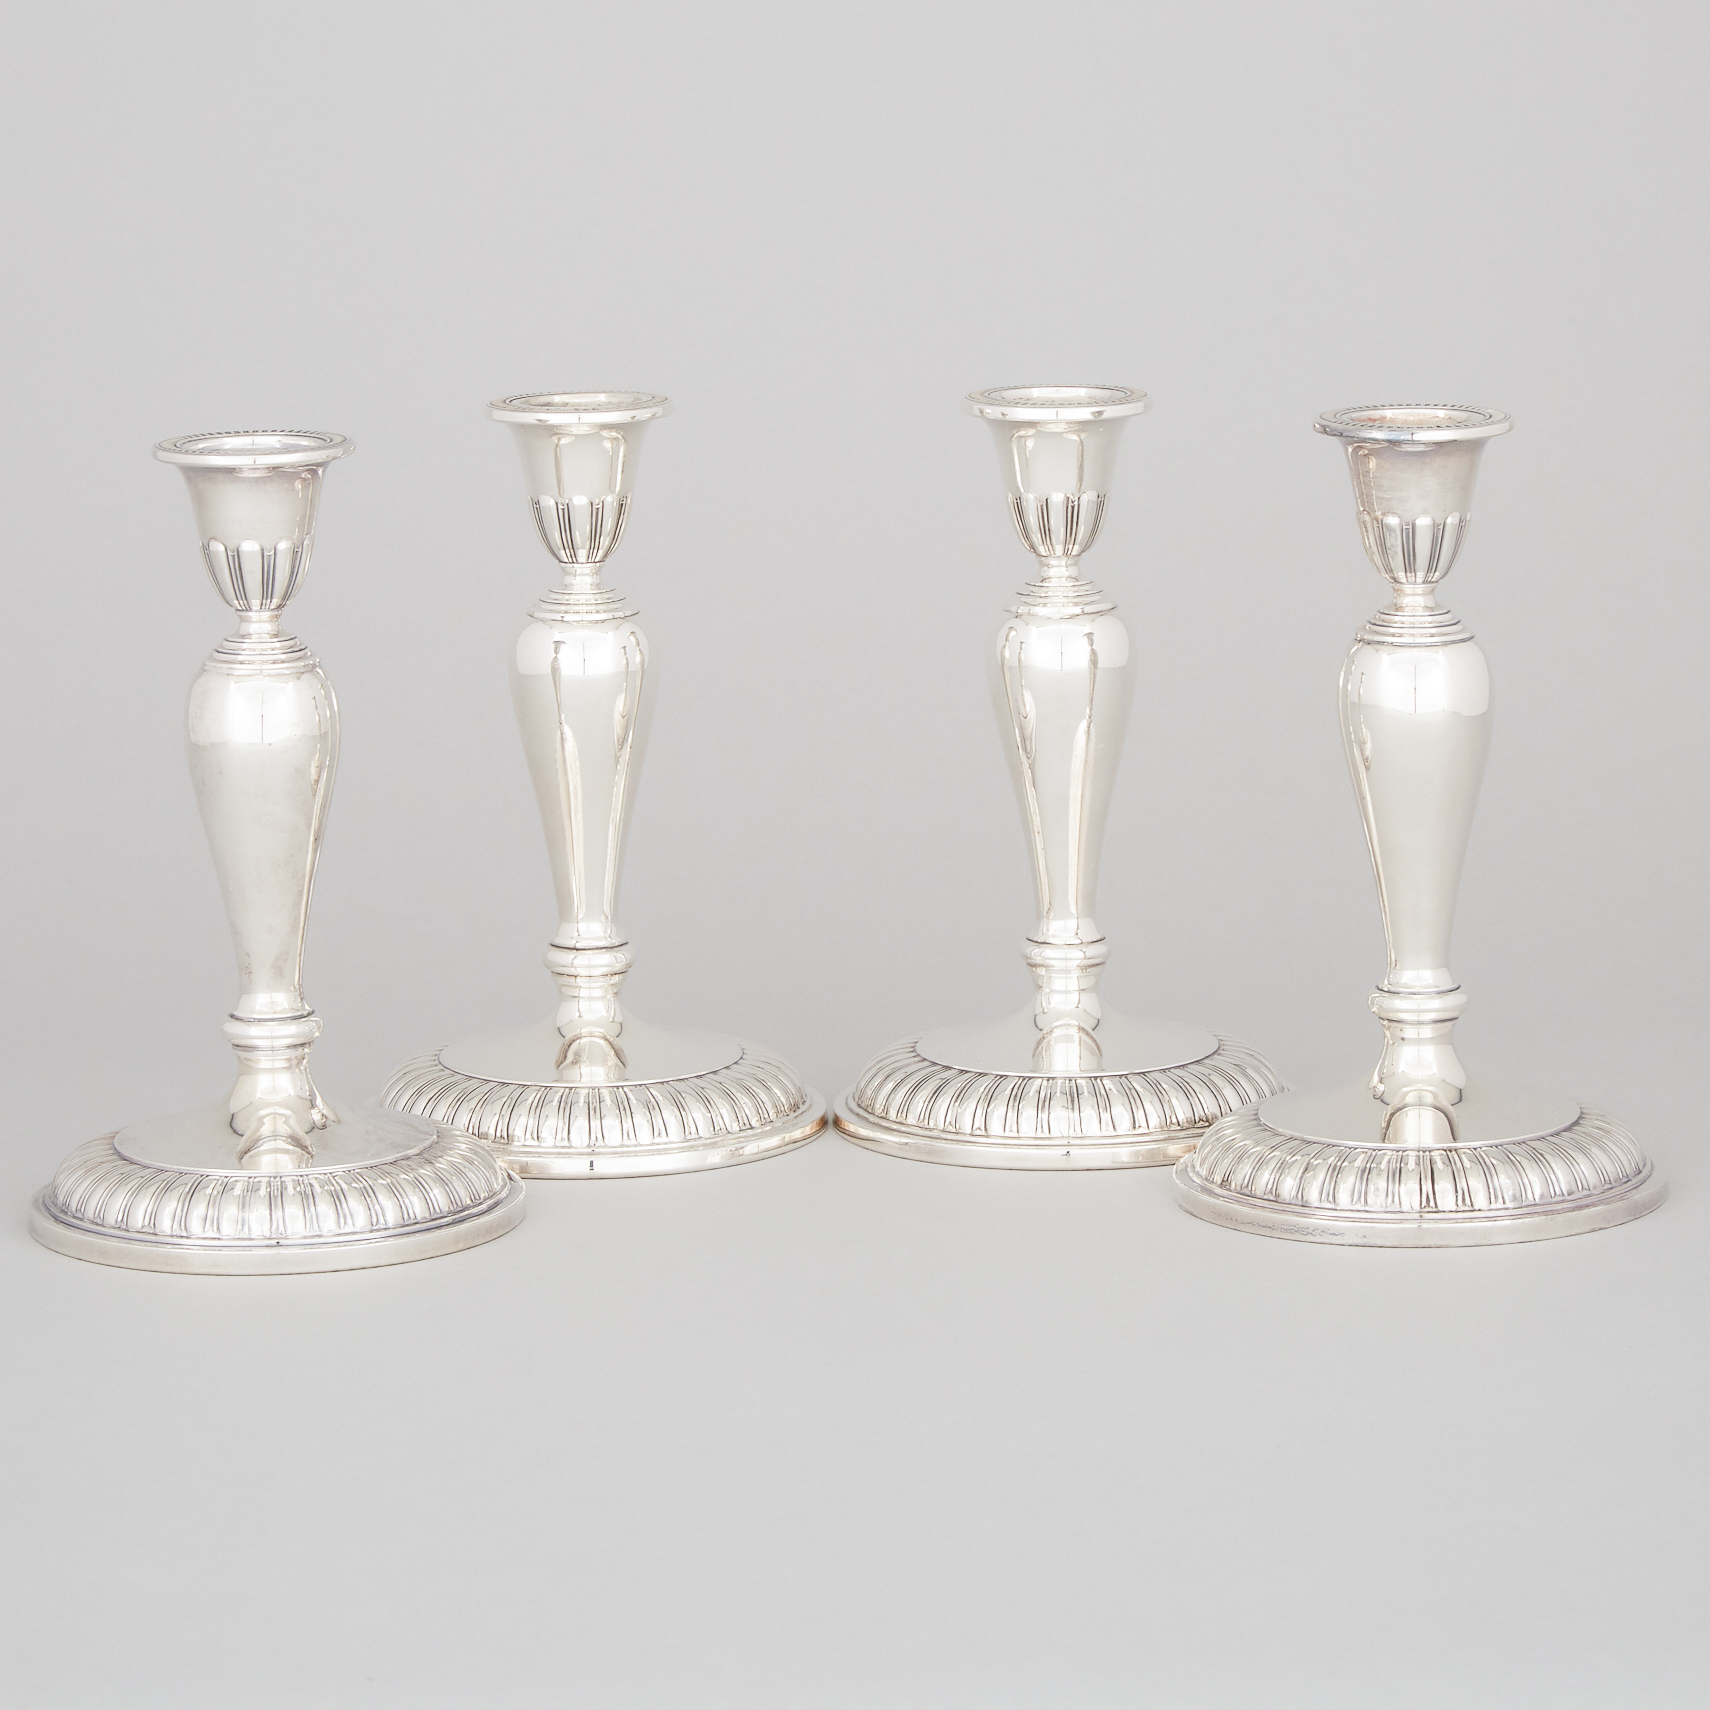 Set of Four Canadian Silver Table Candlesticks, Henry Birks & Sons, Montreal, Que., 1946-61